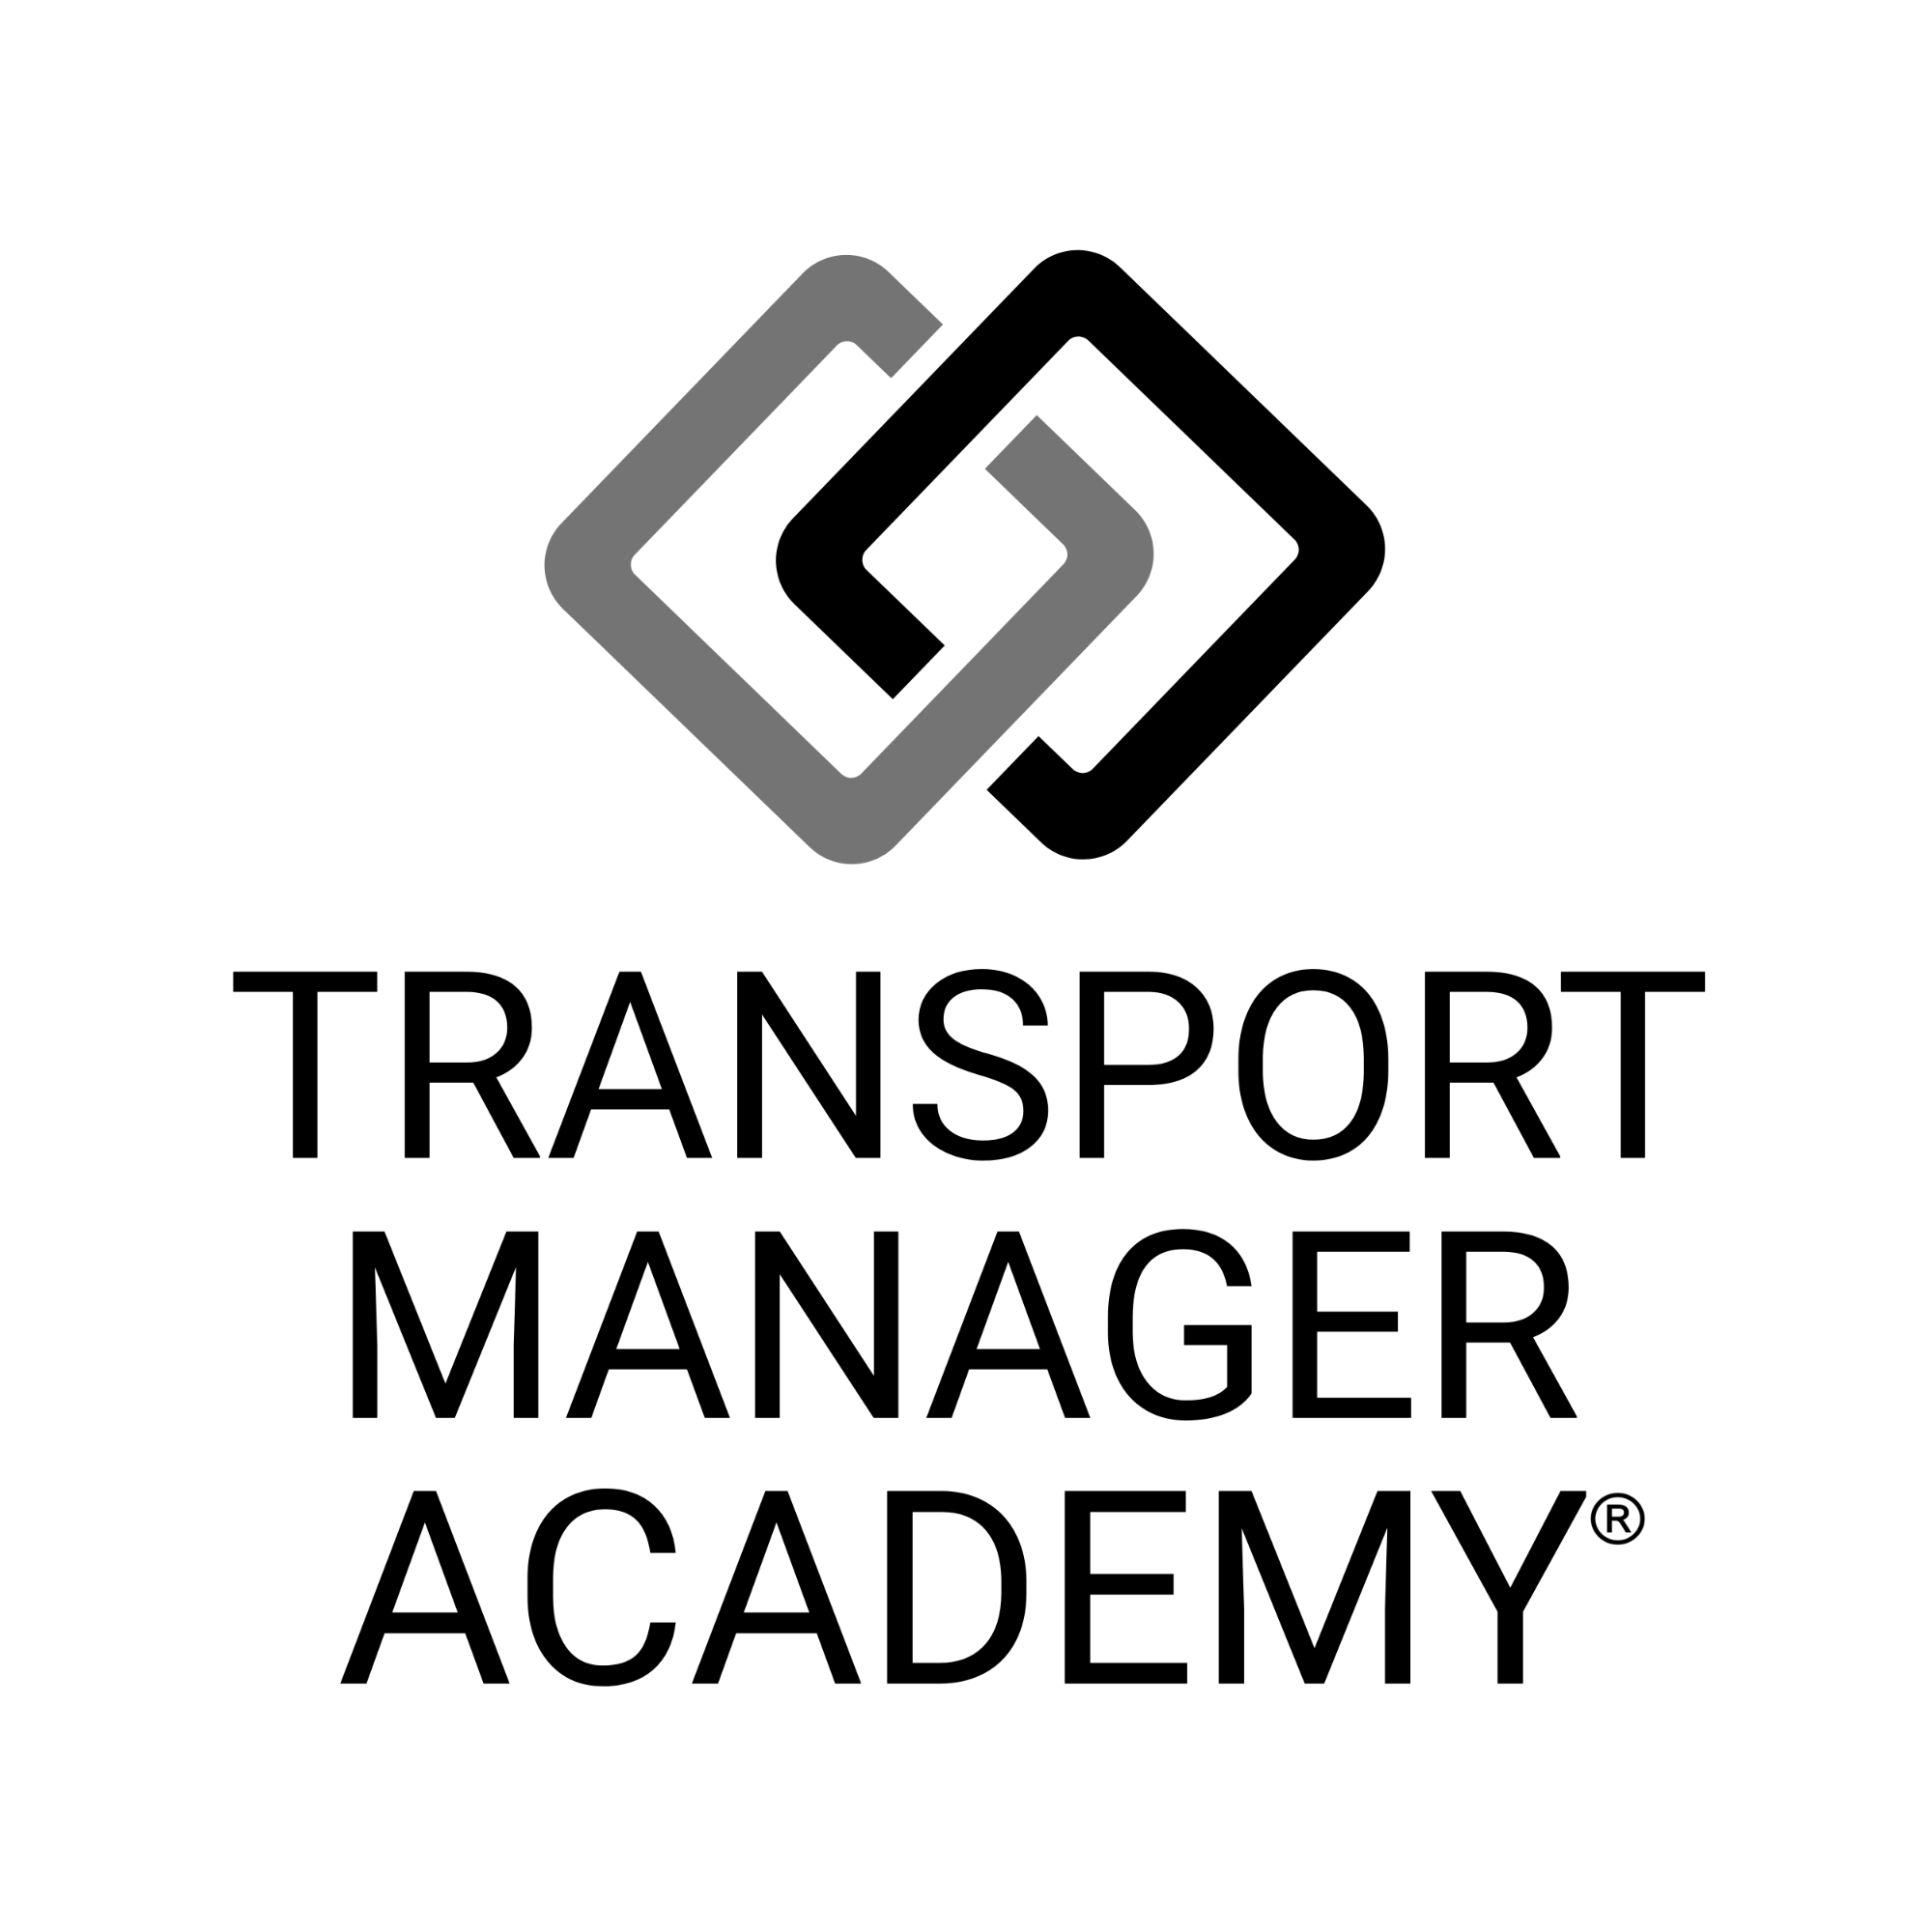 Transport Manager Academy is designed to support you and increase your CPD